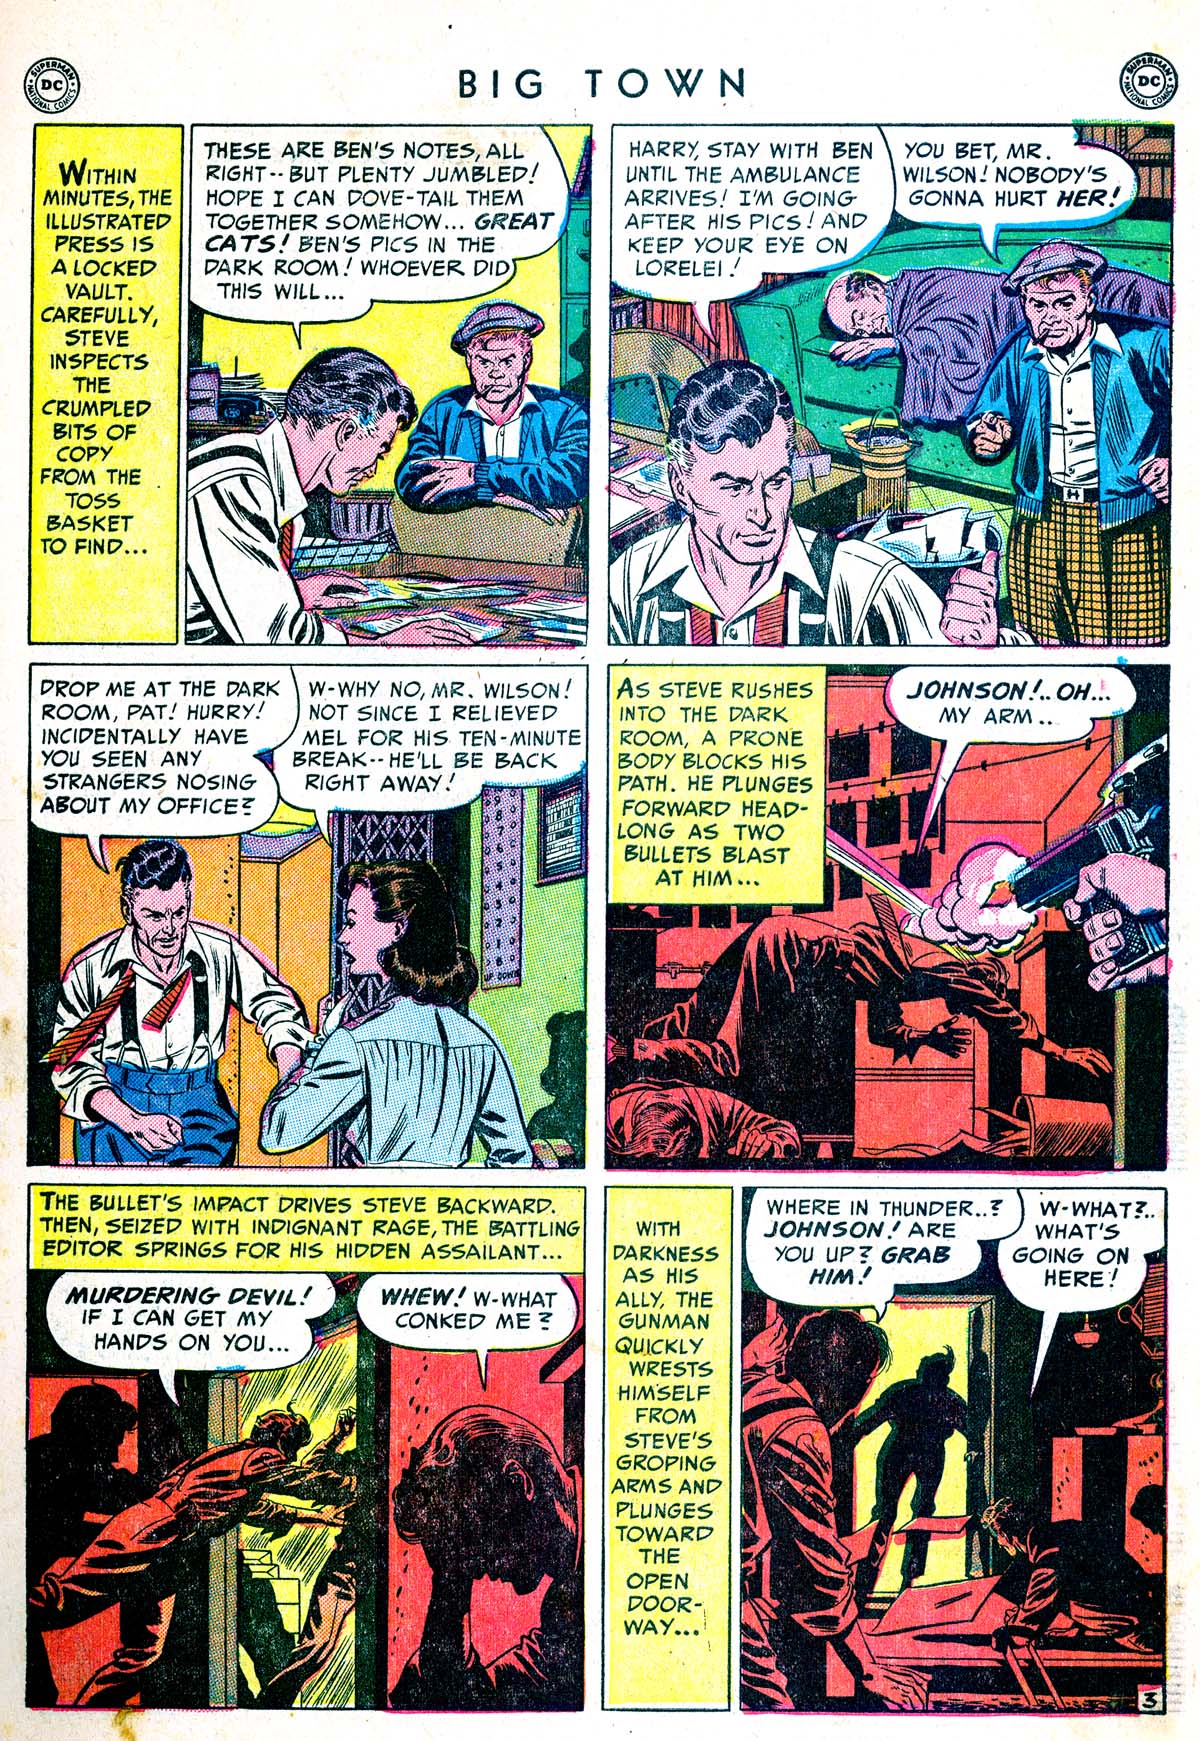 Big Town (1951) 1 Page 4